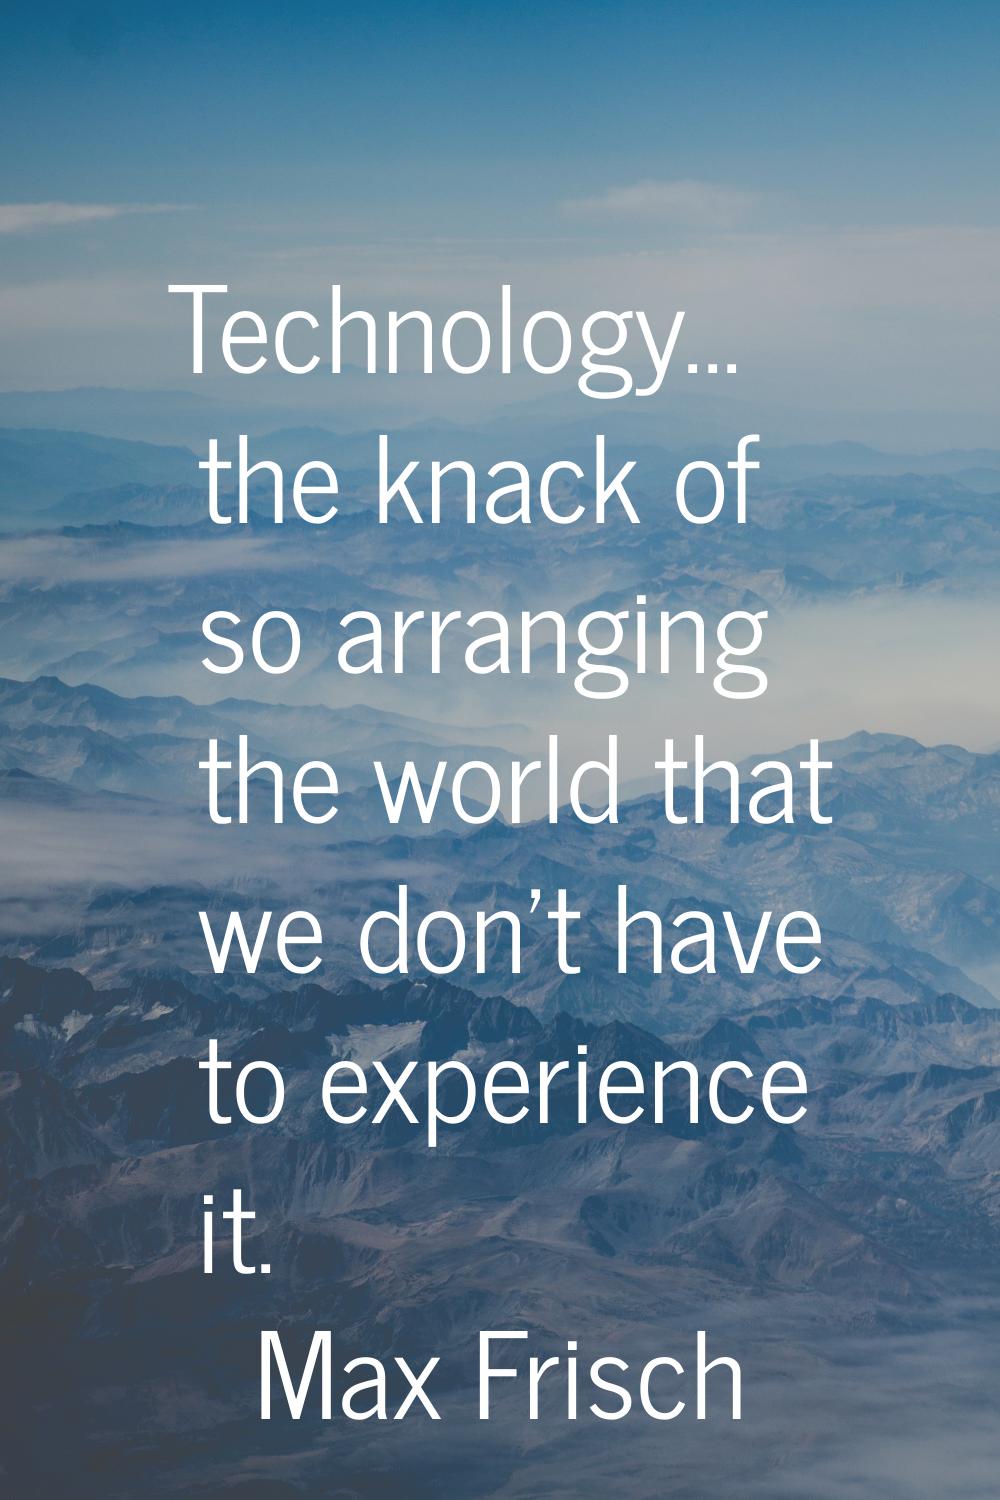 Technology... the knack of so arranging the world that we don't have to experience it.